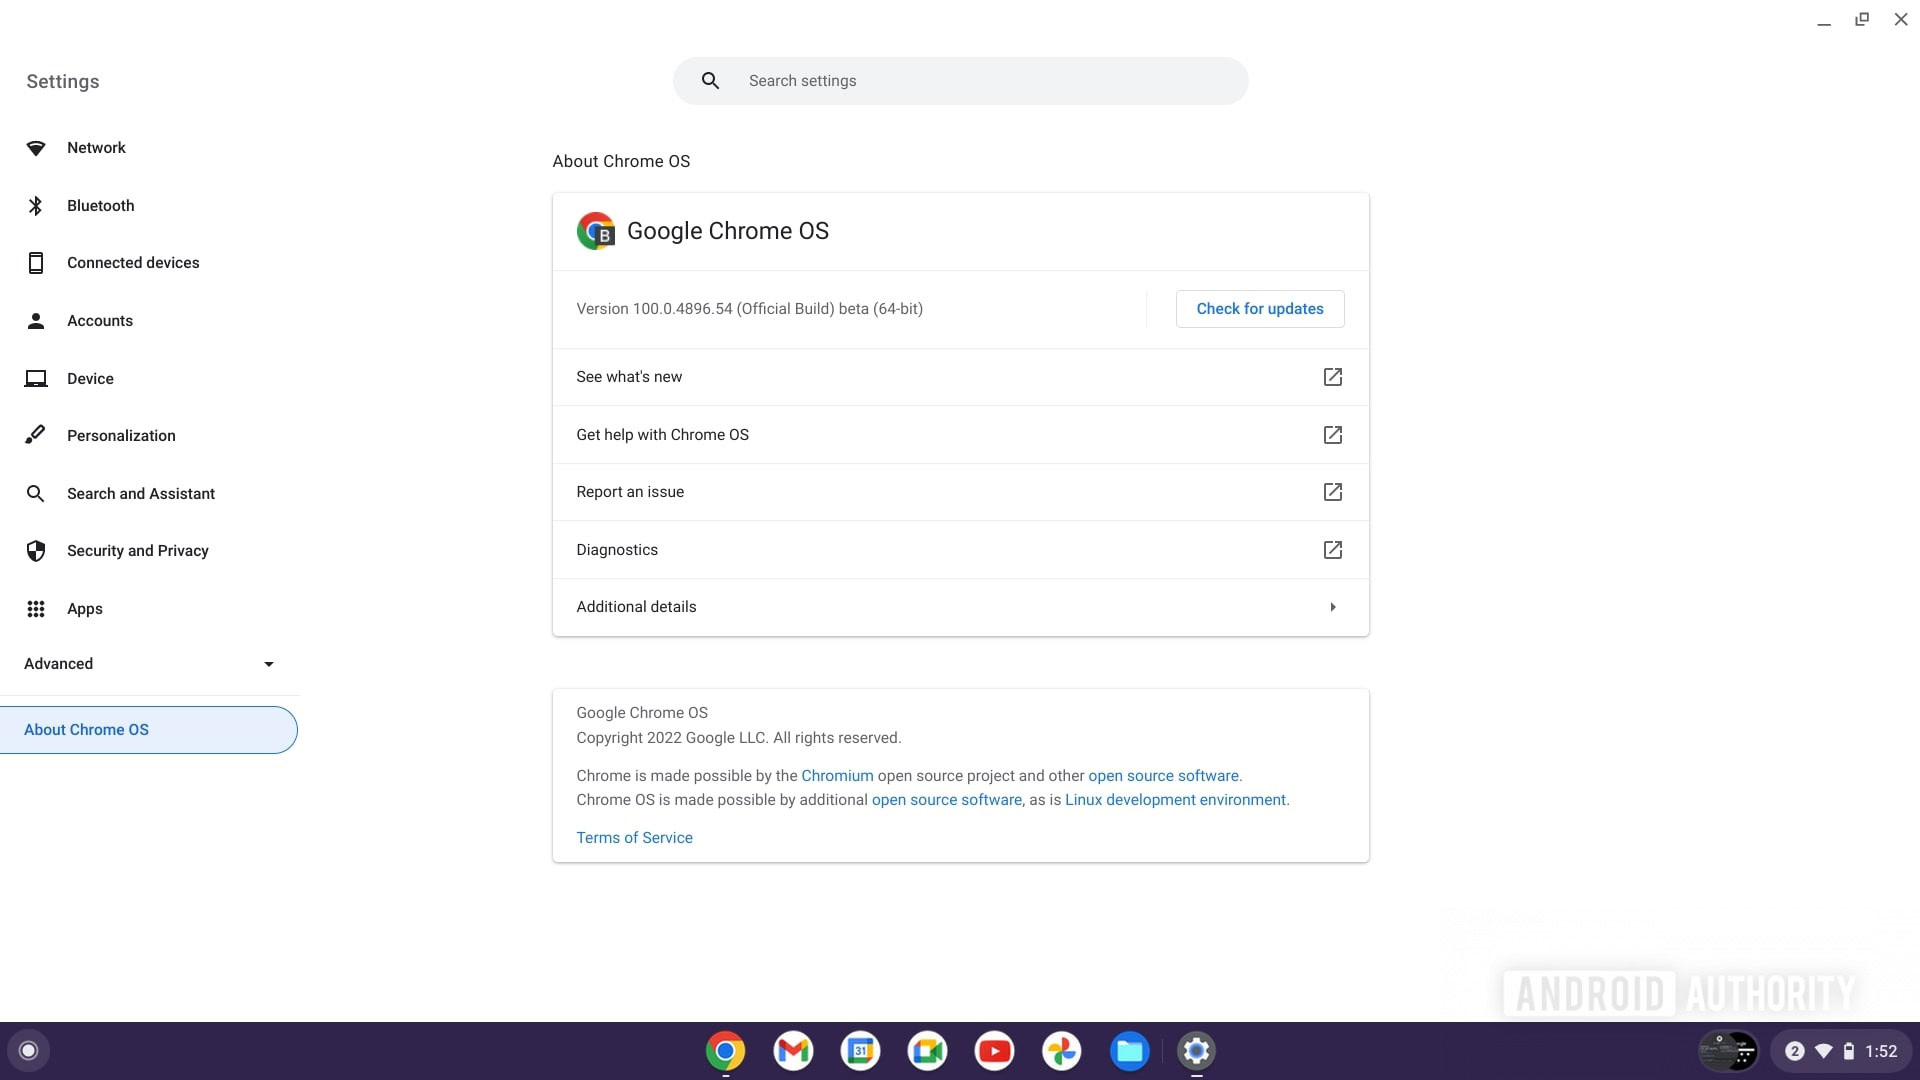 Chromebook about chrome OS screen